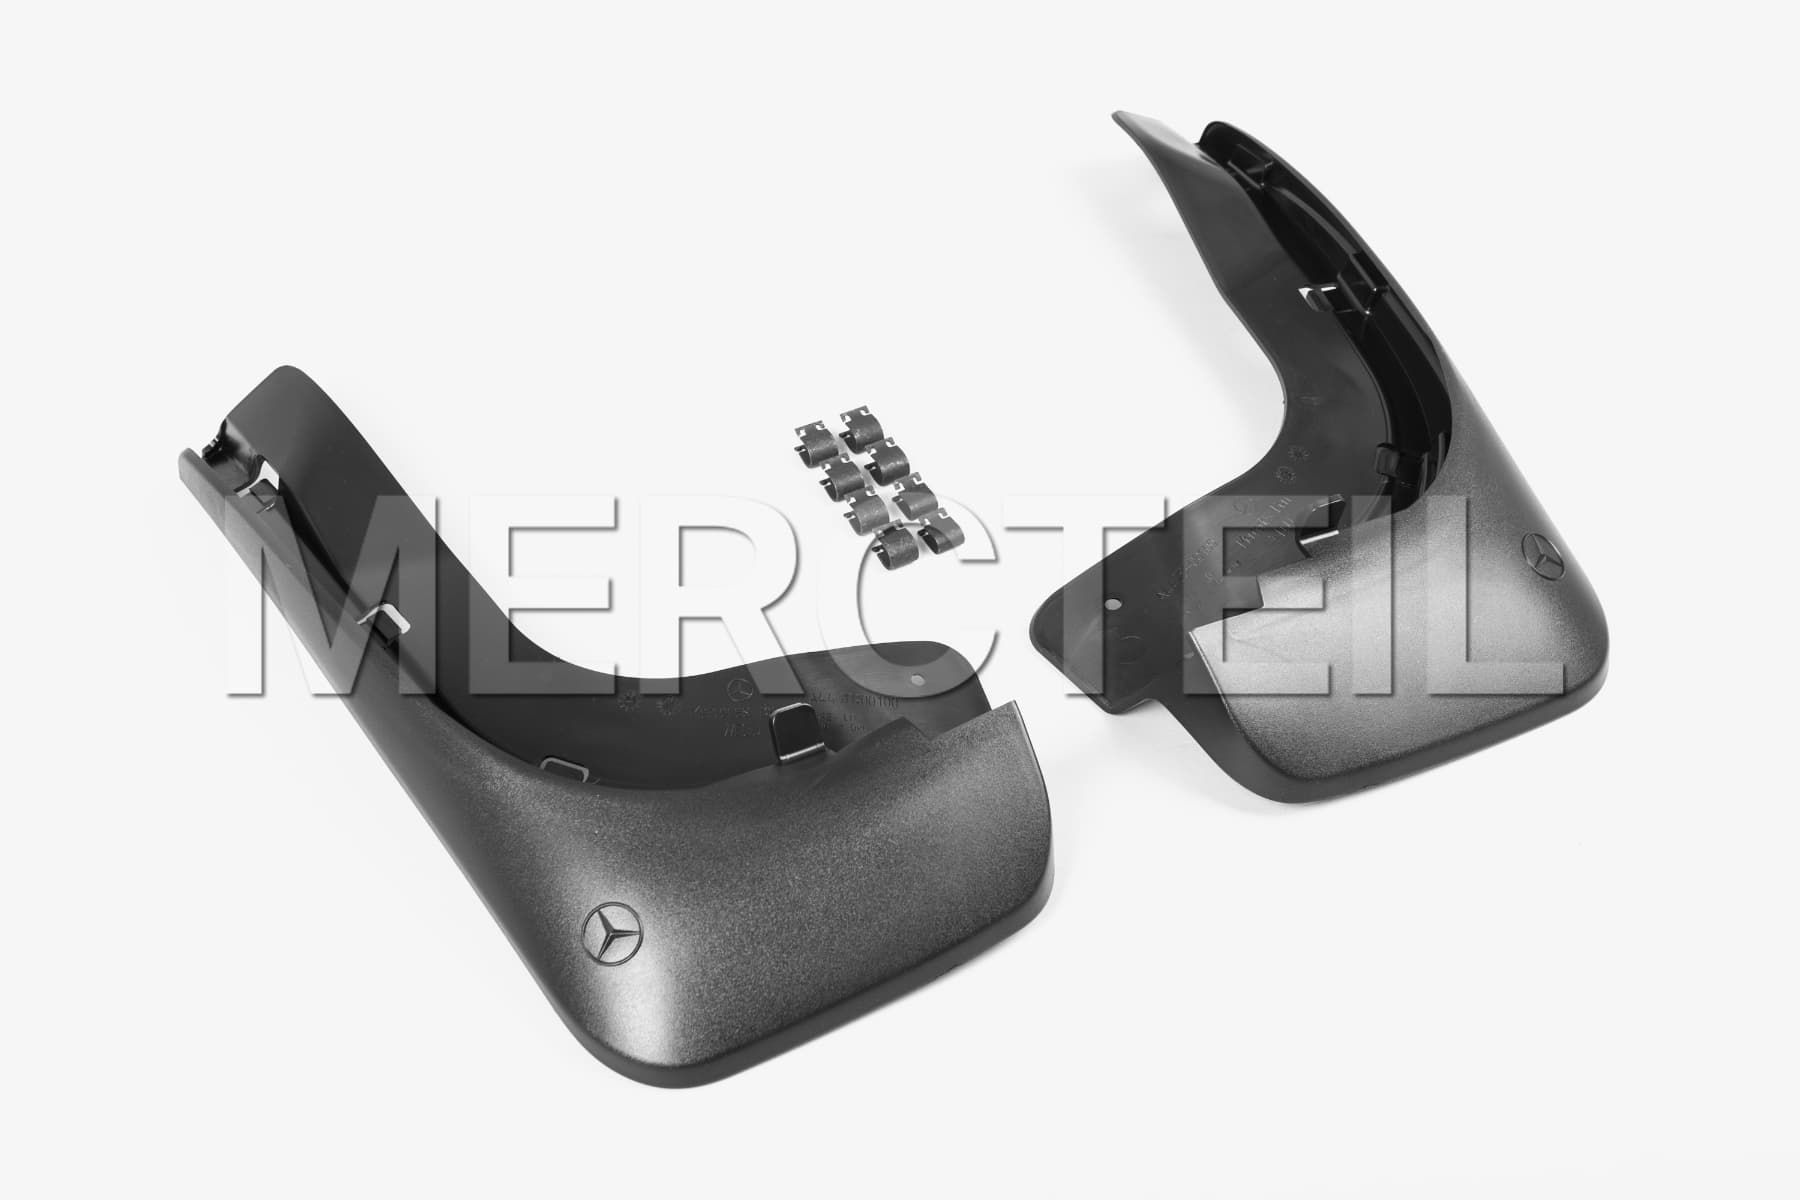 V-Class / Vito Rear Axle Mud Flaps W447 Genuine Mercedes-Benz (Part number: A4478900100)